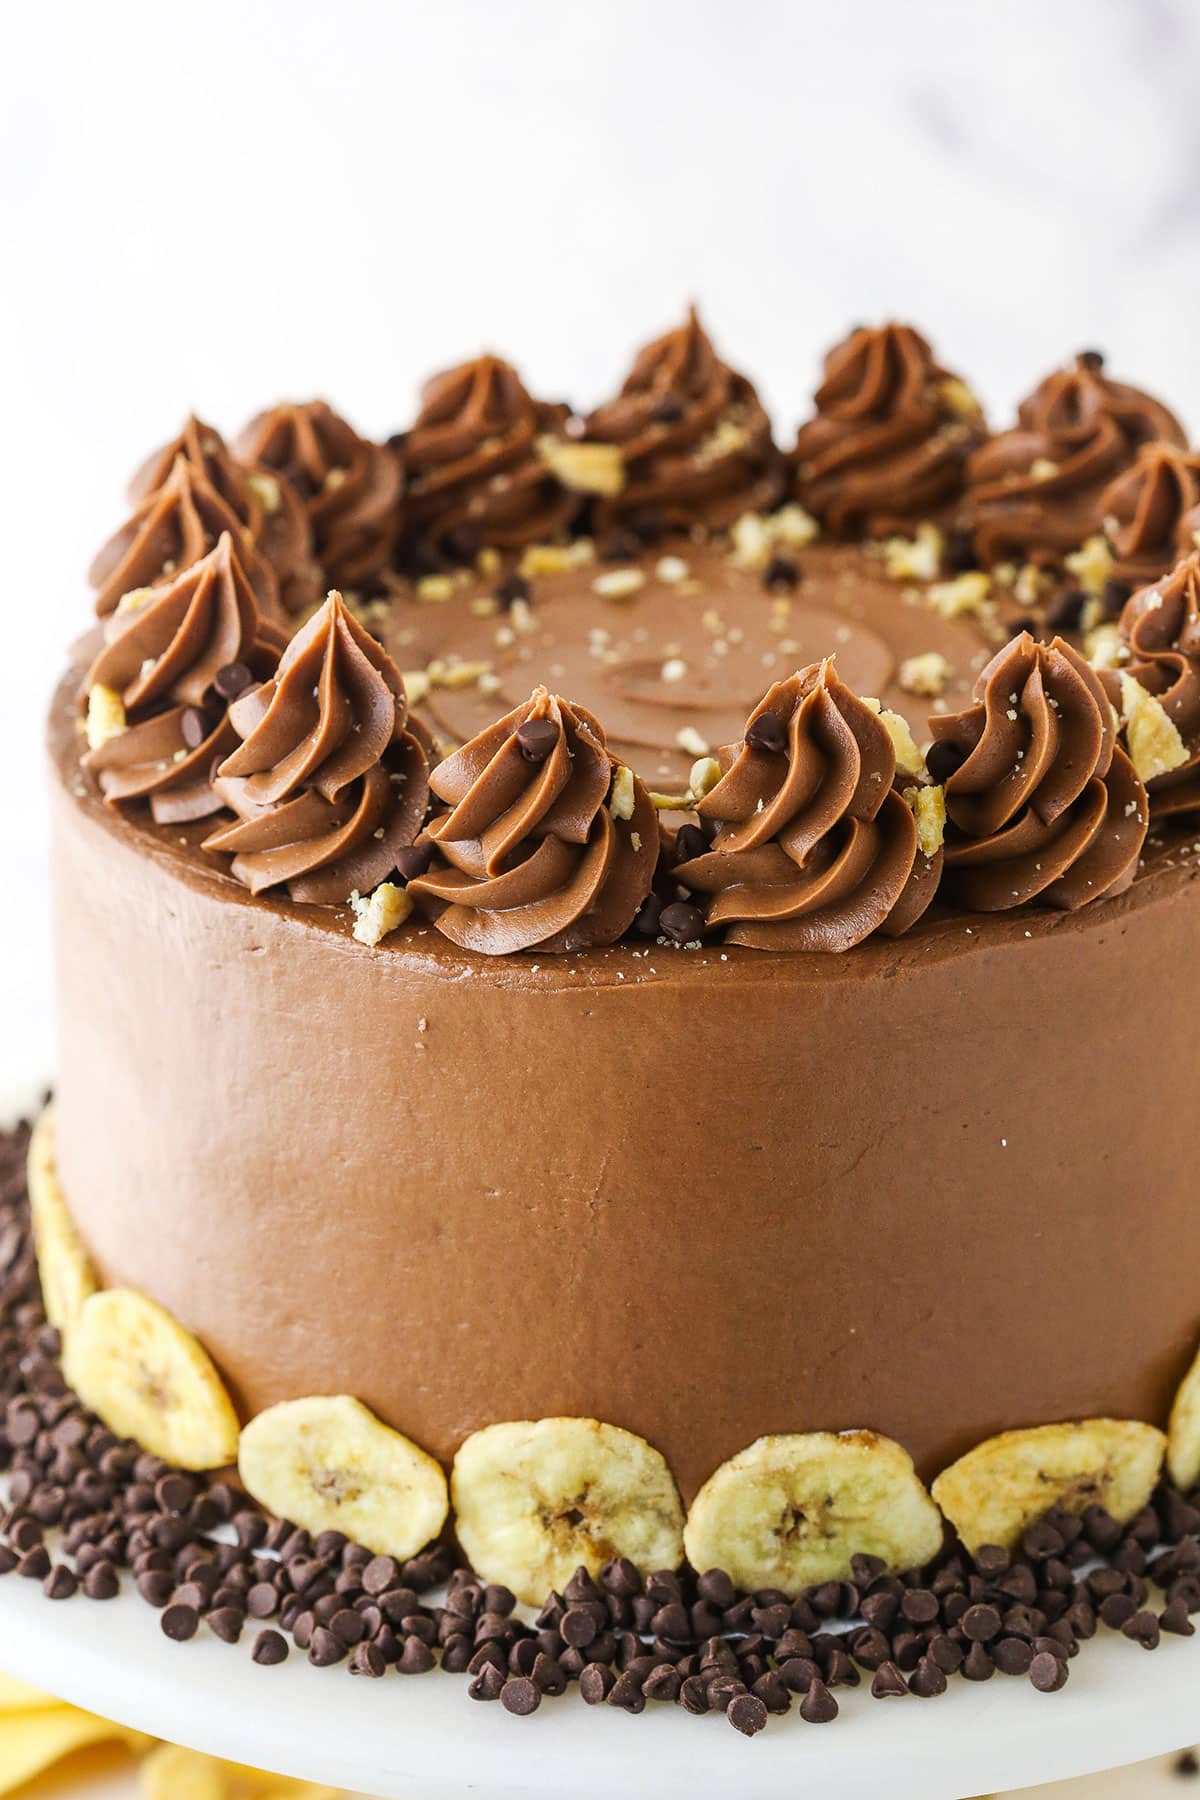 Side view of banana chocolate cake with chocolate frosting swirls and bits of crushed banana chips and chocolate chips on top.